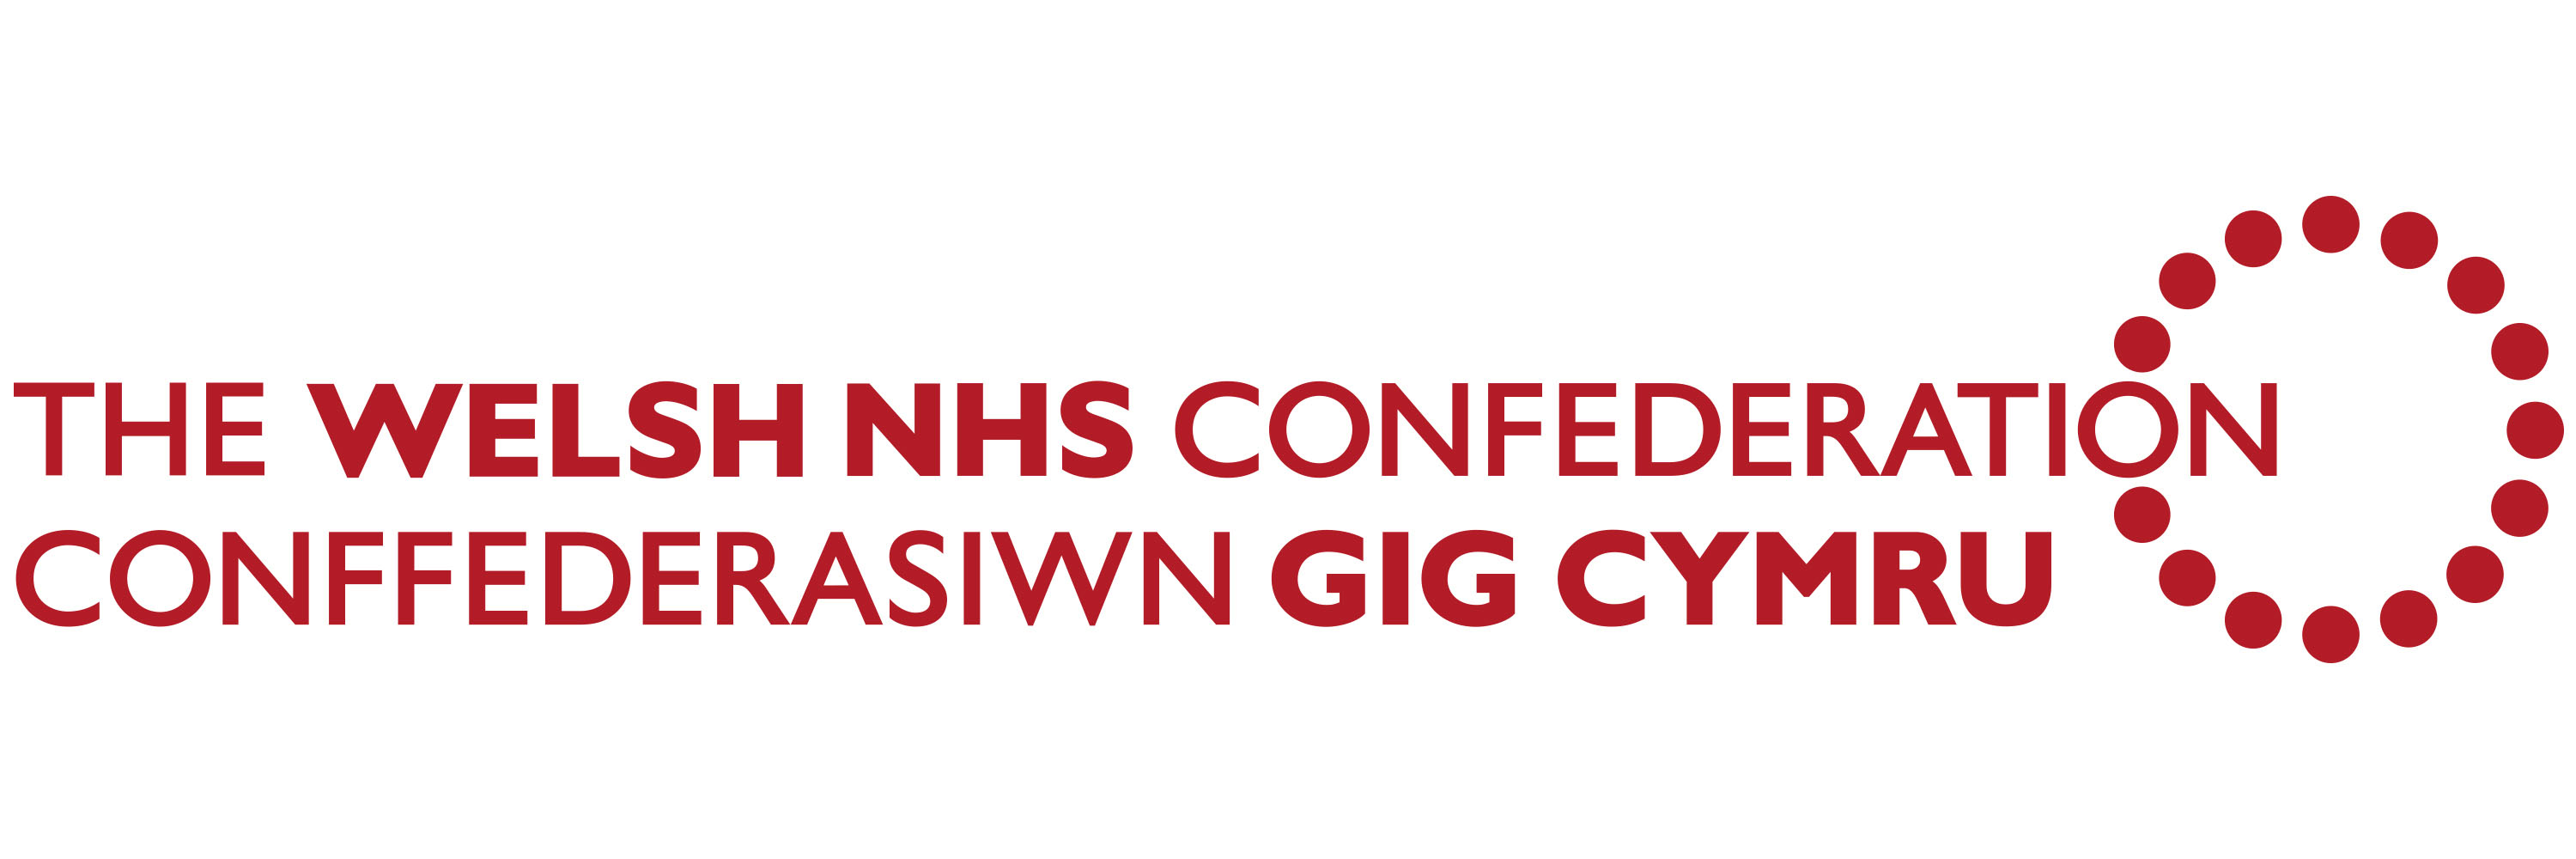 Health Inequalities Welsh NHS Confederation